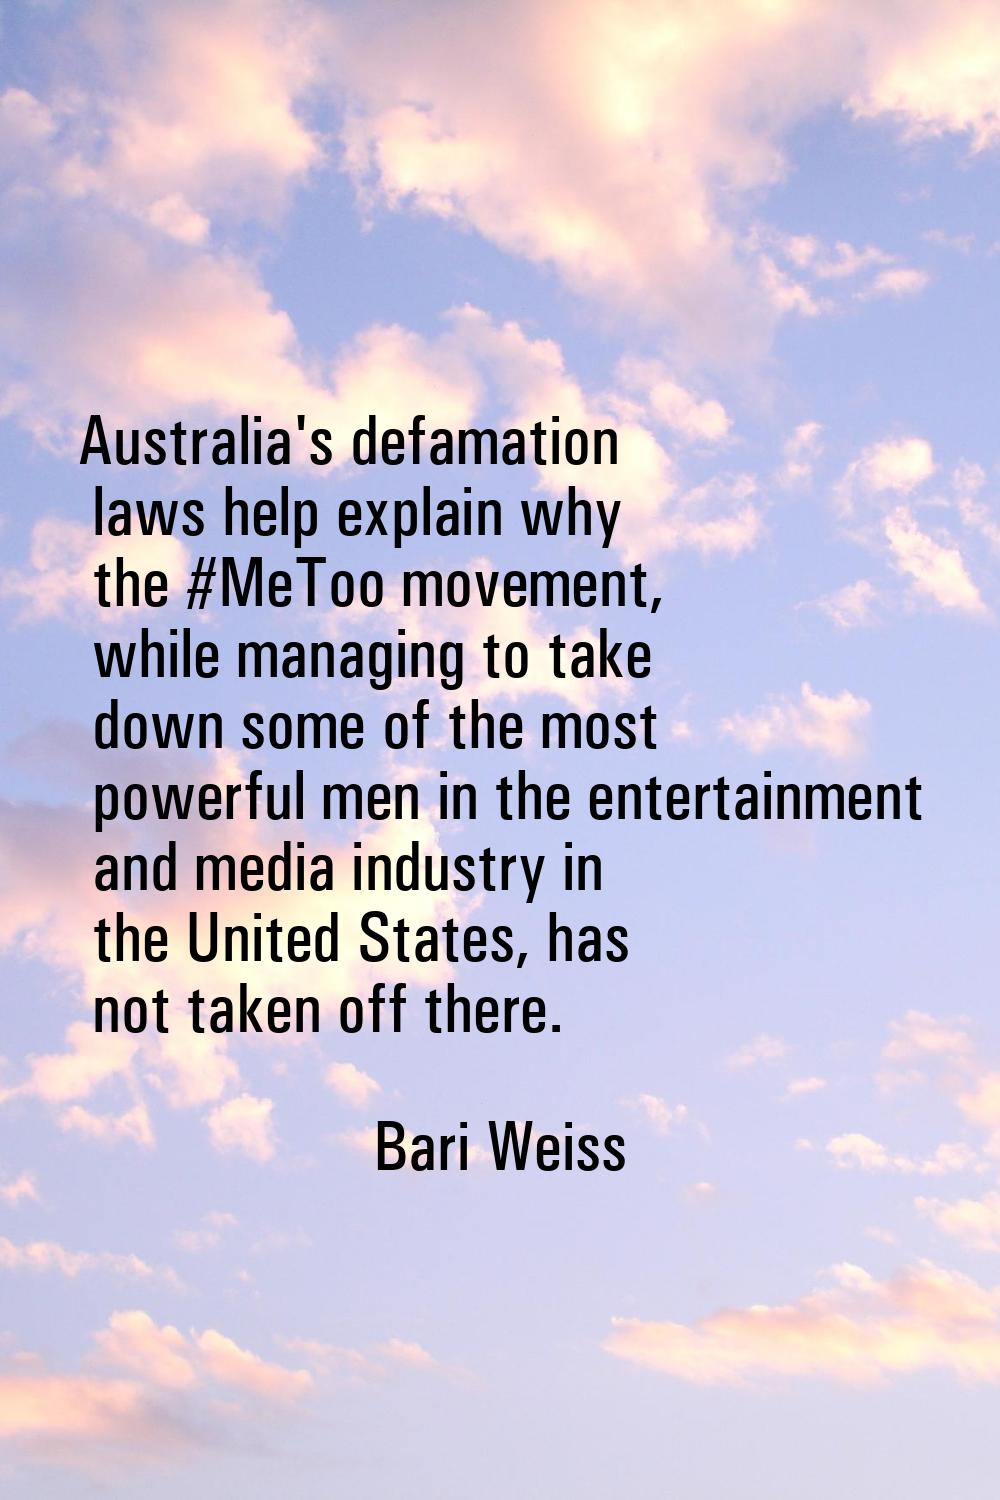 Australia's defamation laws help explain why the #MeToo movement, while managing to take down some 